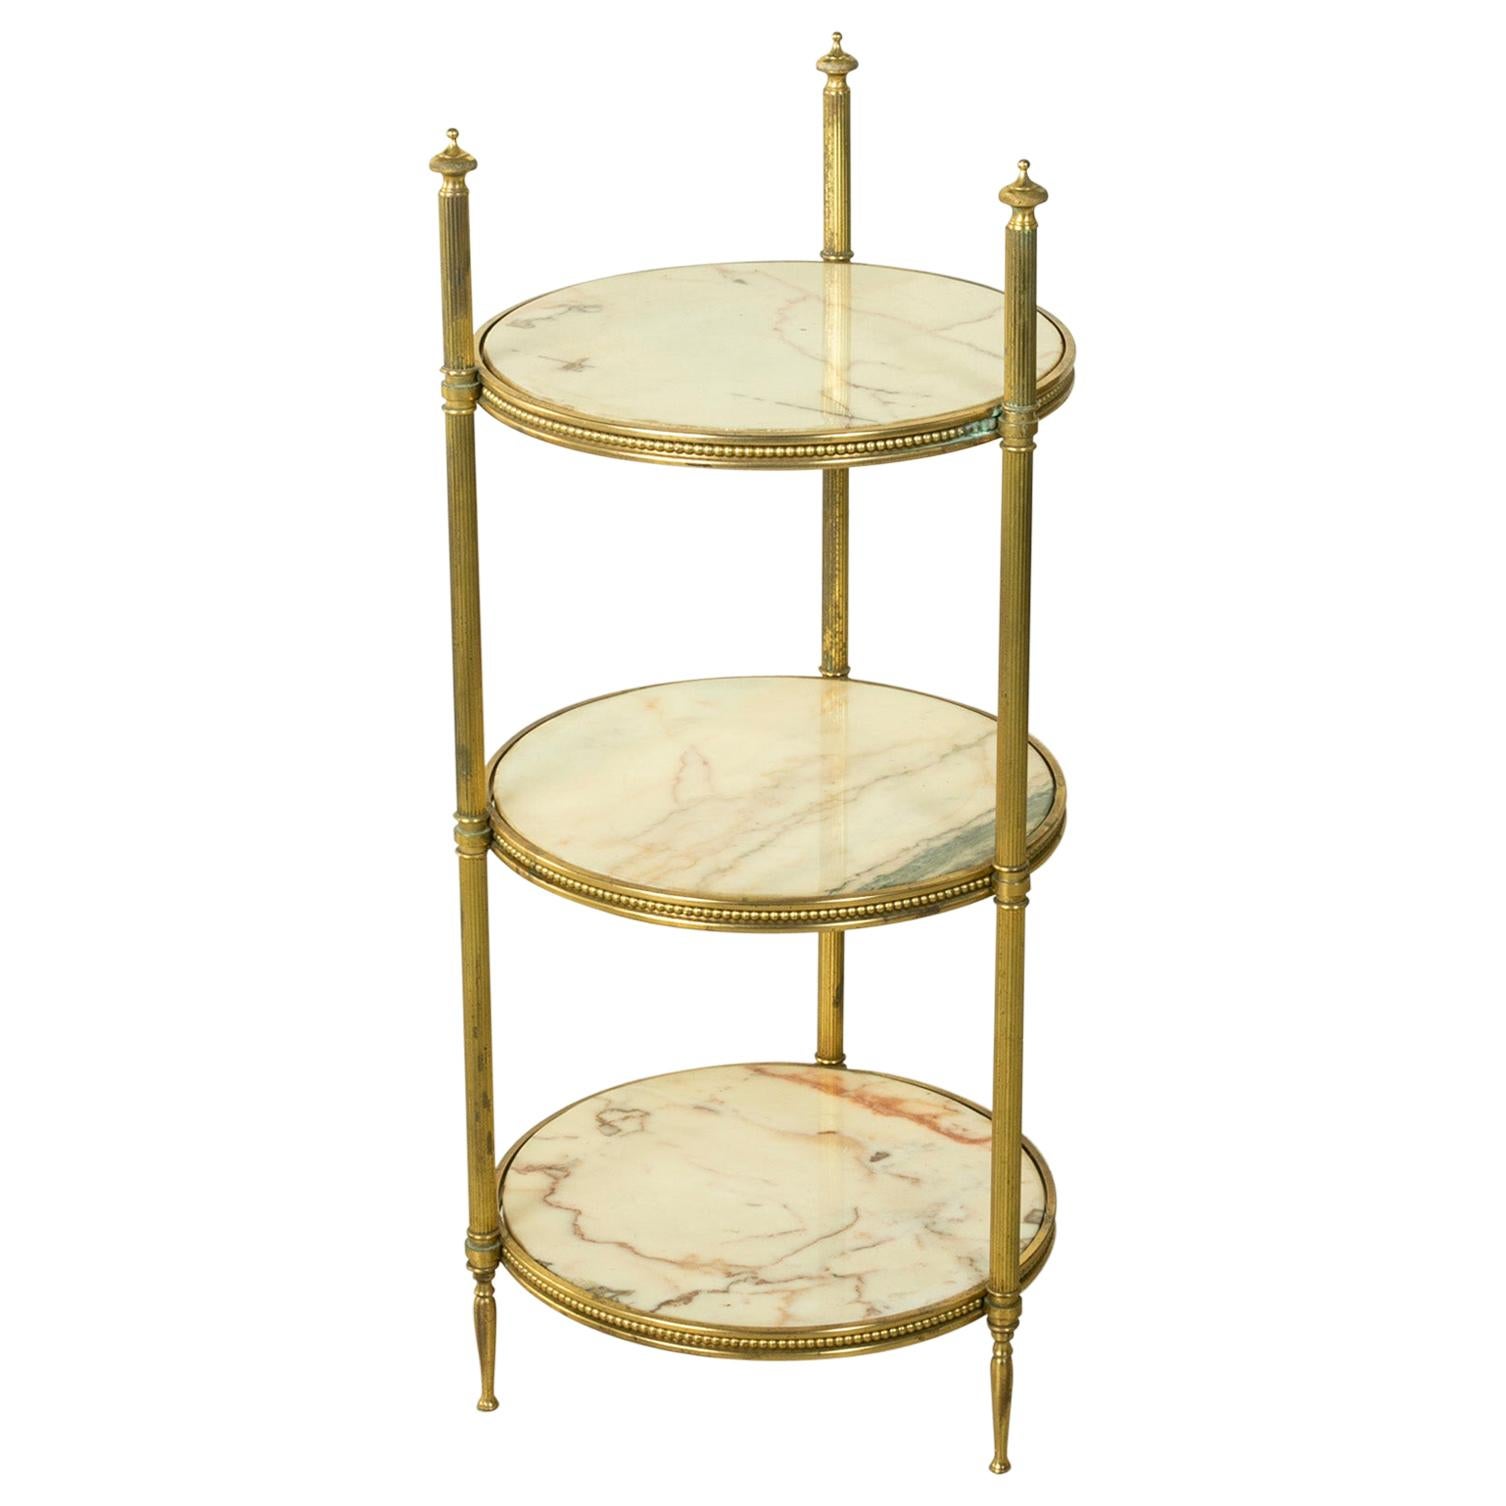 Early 20th Century French Brass Pastry Presentation Server with Marble Shelves